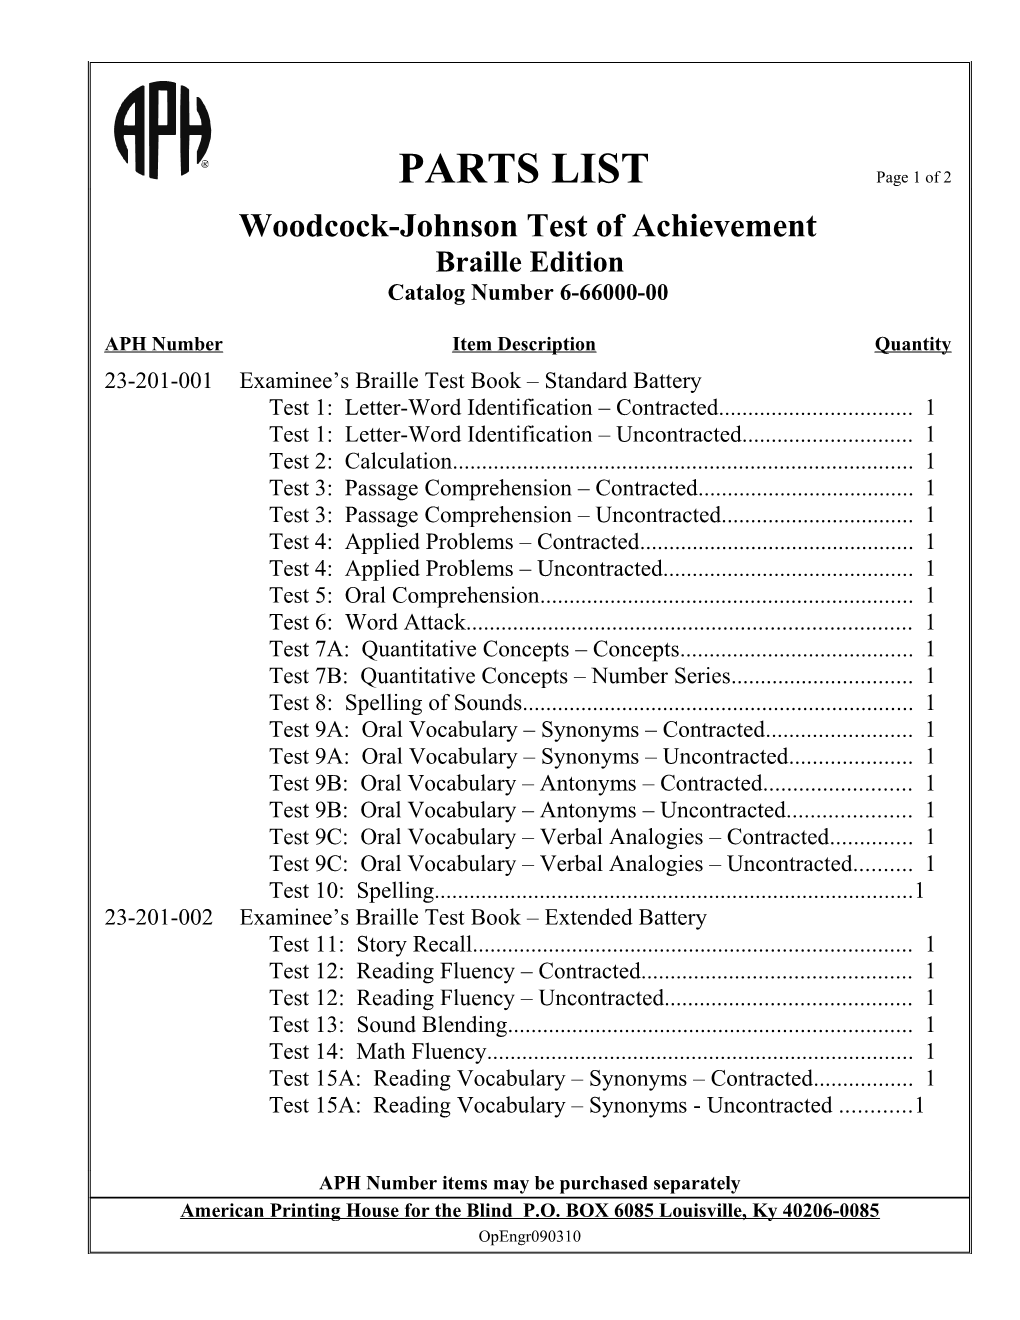 PARTS LIST Page 1 of 2